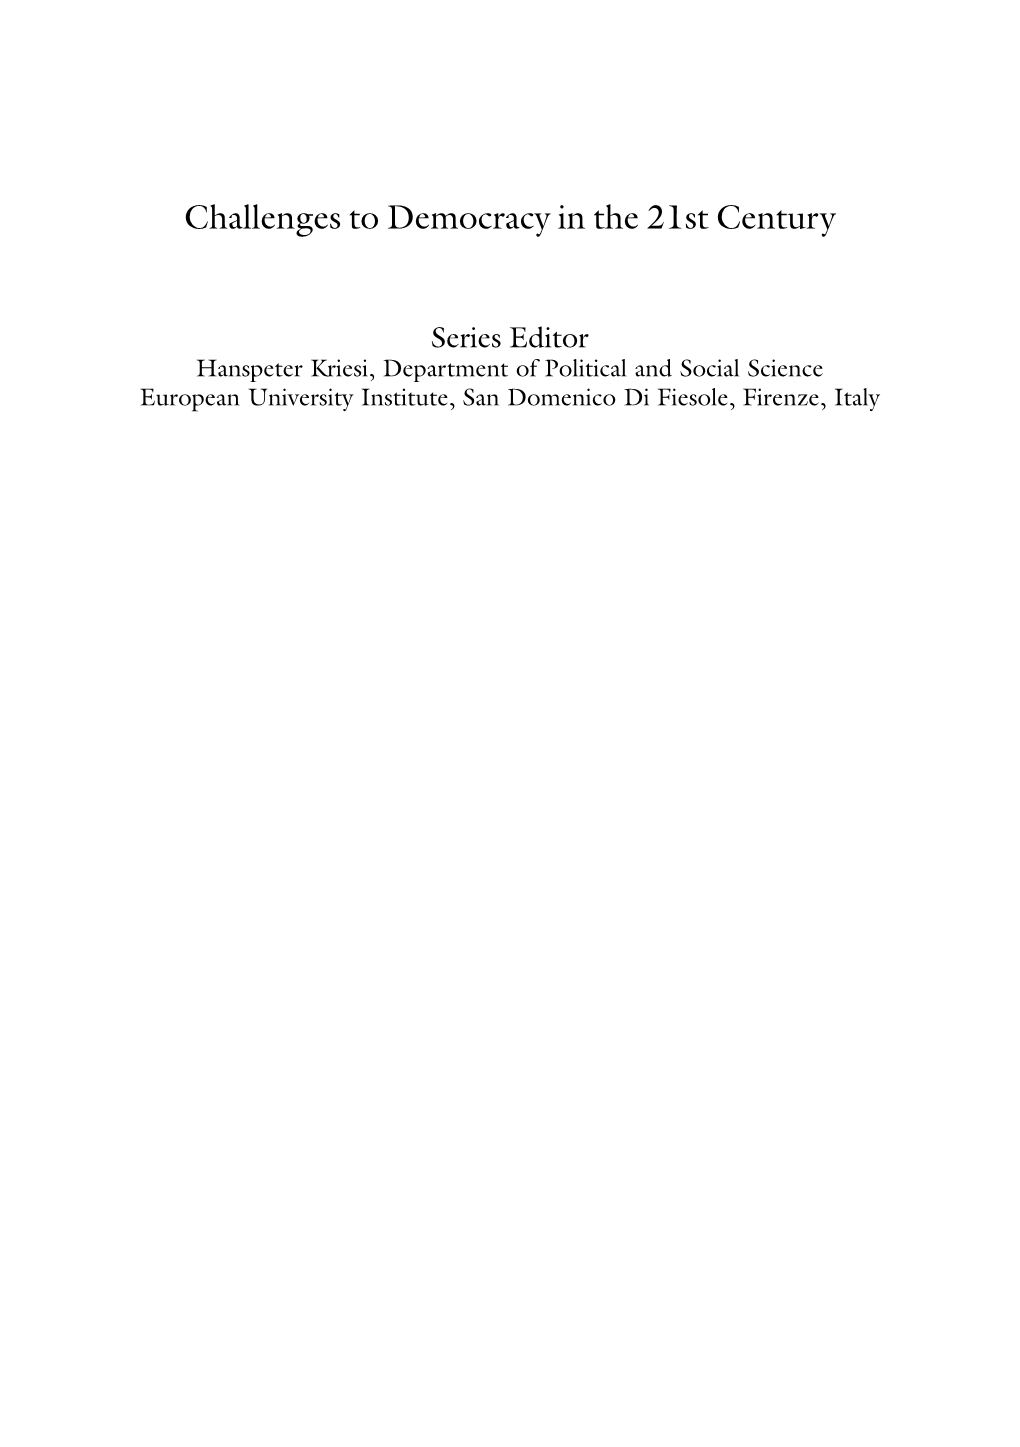 Challenges to Democracy in the 21St Century